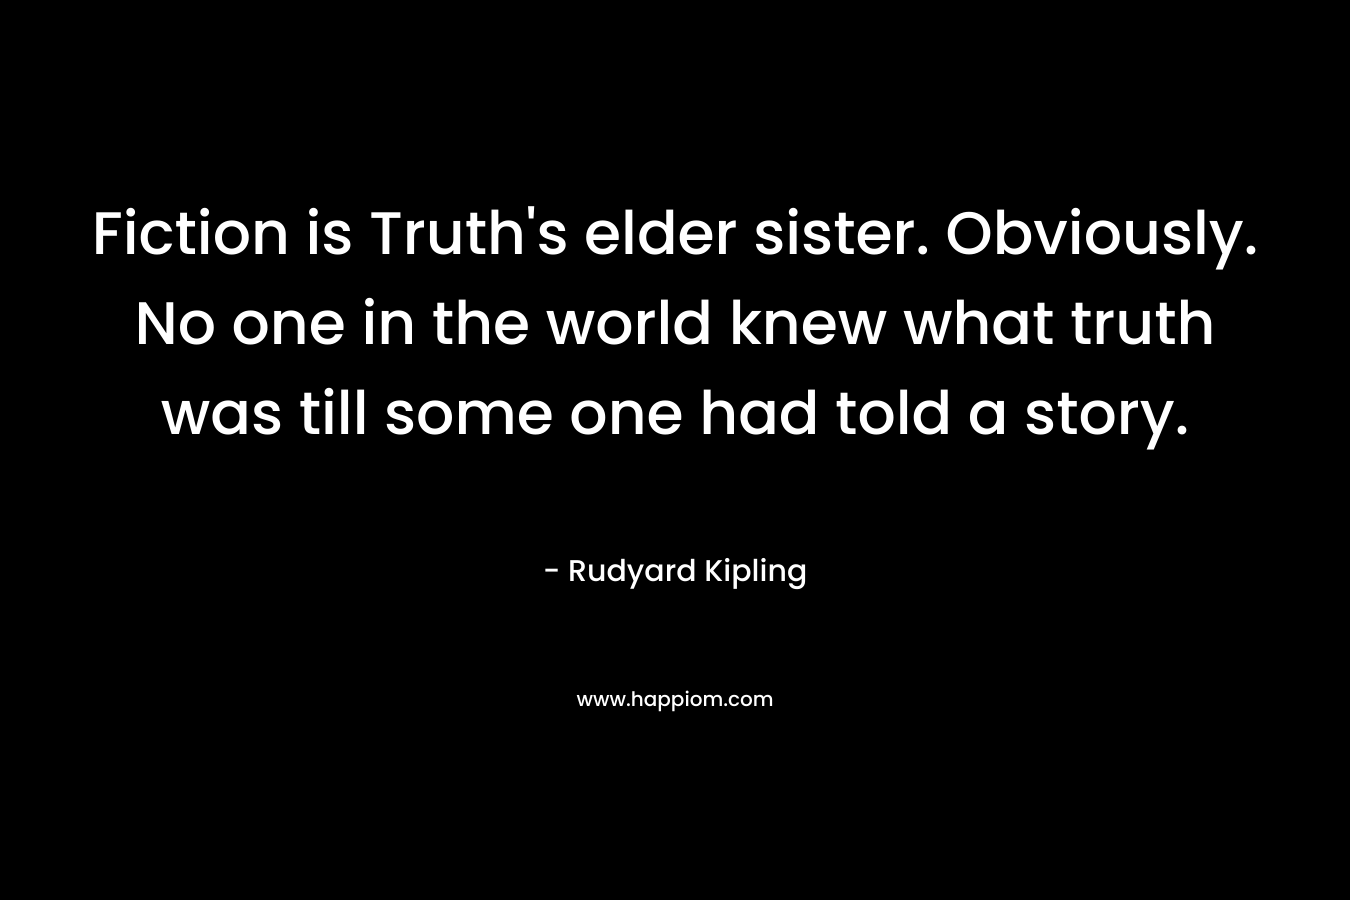 Fiction is Truth’s elder sister. Obviously. No one in the world knew what truth was till some one had told a story. – Rudyard Kipling